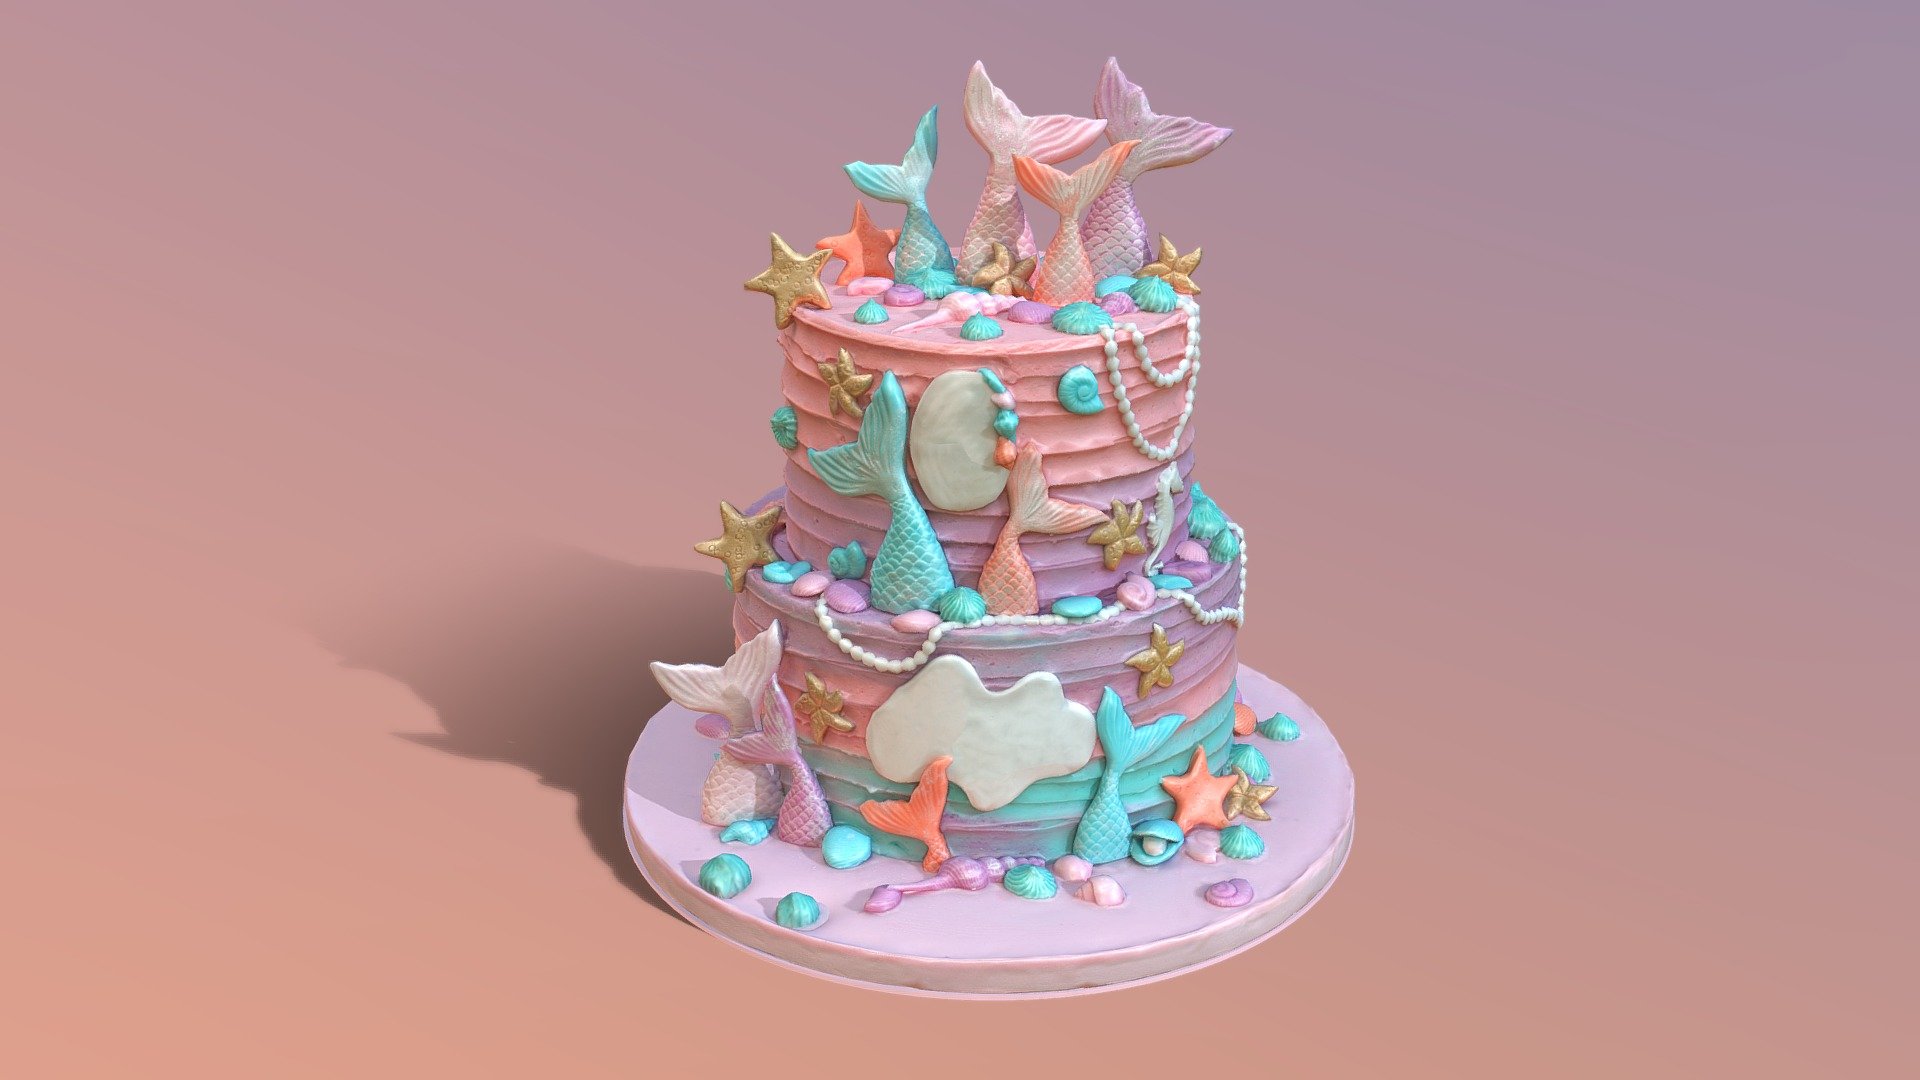 3D scan of a elegant Mermaid Cake which is made by CAKESBURG Online Premium Cake Shop in UK. You can also order real cake from this link: https://cakesburg.co.uk/collections/best-seller-2/products/mermaid-cake-2

Textures 4096*4096px PBR photoscan-based materials Base Color, Normal, Roughness, Specular) - Elegant Mermaid Cake - Buy Royalty Free 3D model by Cakesburg Premium 3D Cake Shop (@Viscom_Cakesburg) 3d model